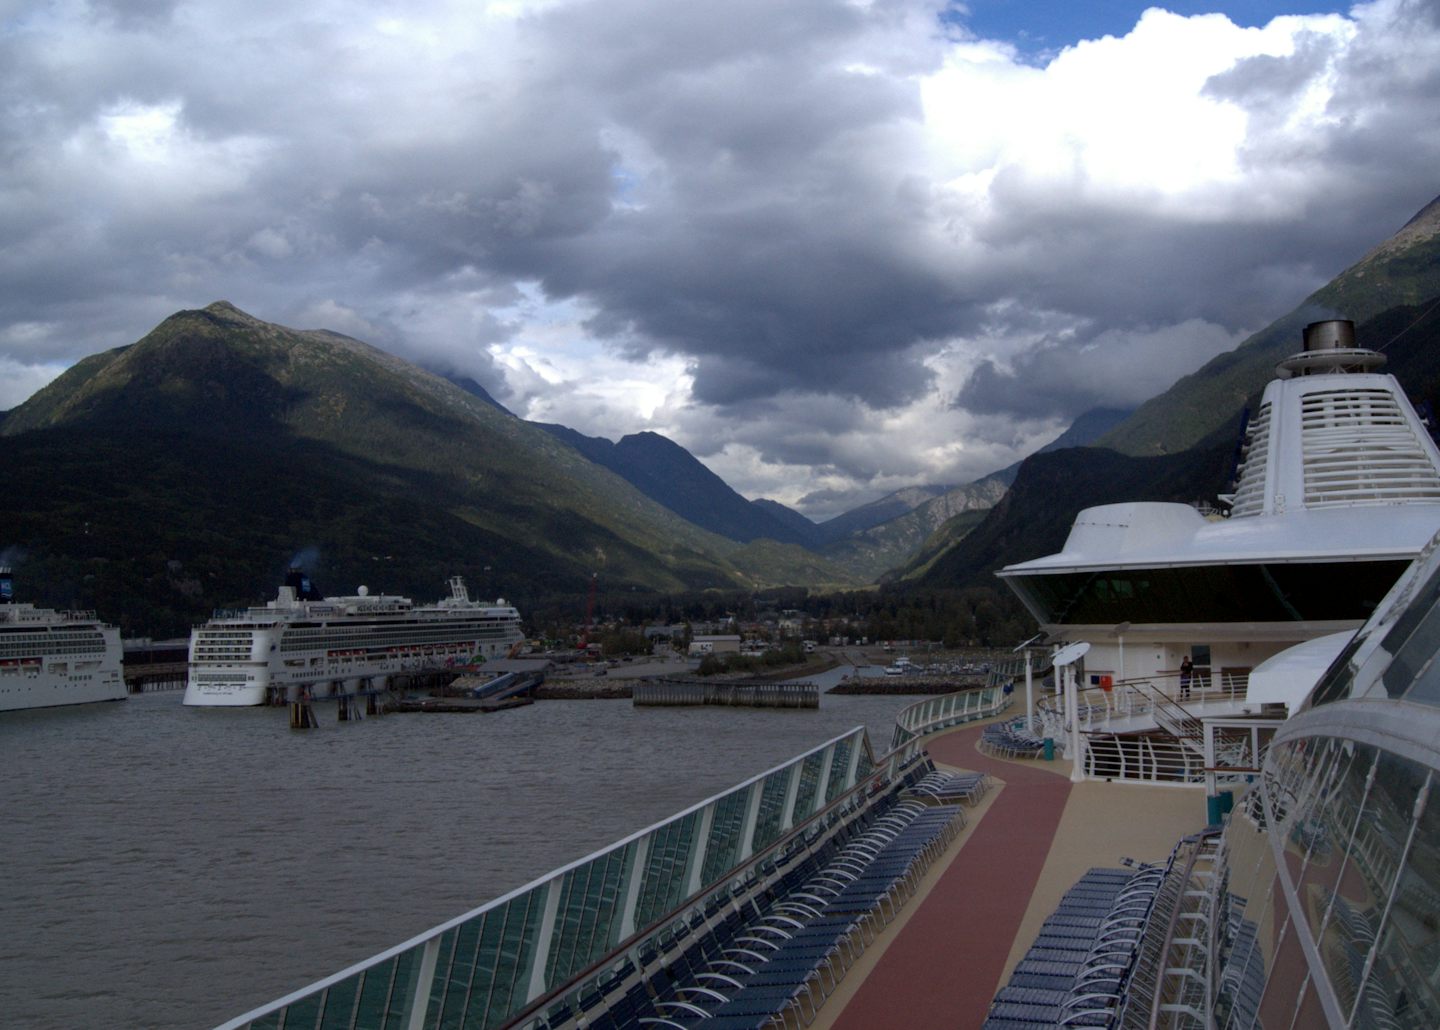 View of Skagway from the Radiance of the Seas